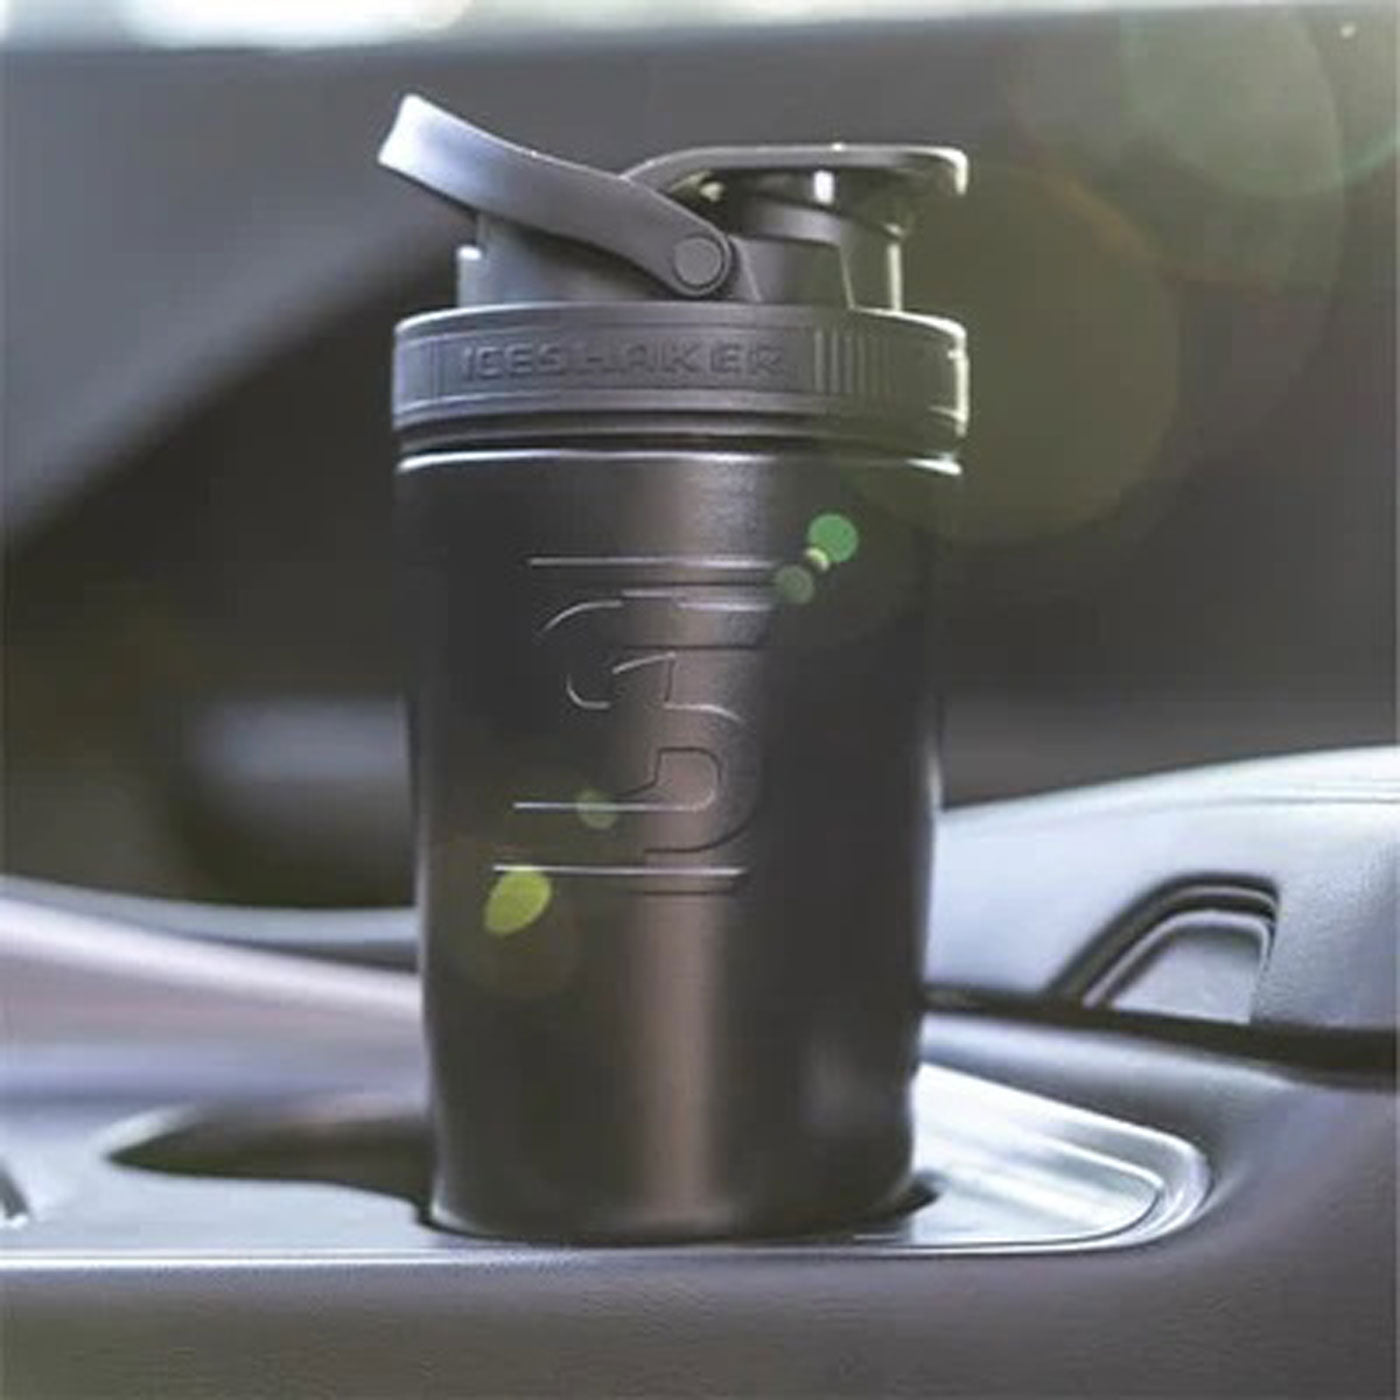 A black-colored 36oz Ice Shaker fitting easily into the cup holder in a car.